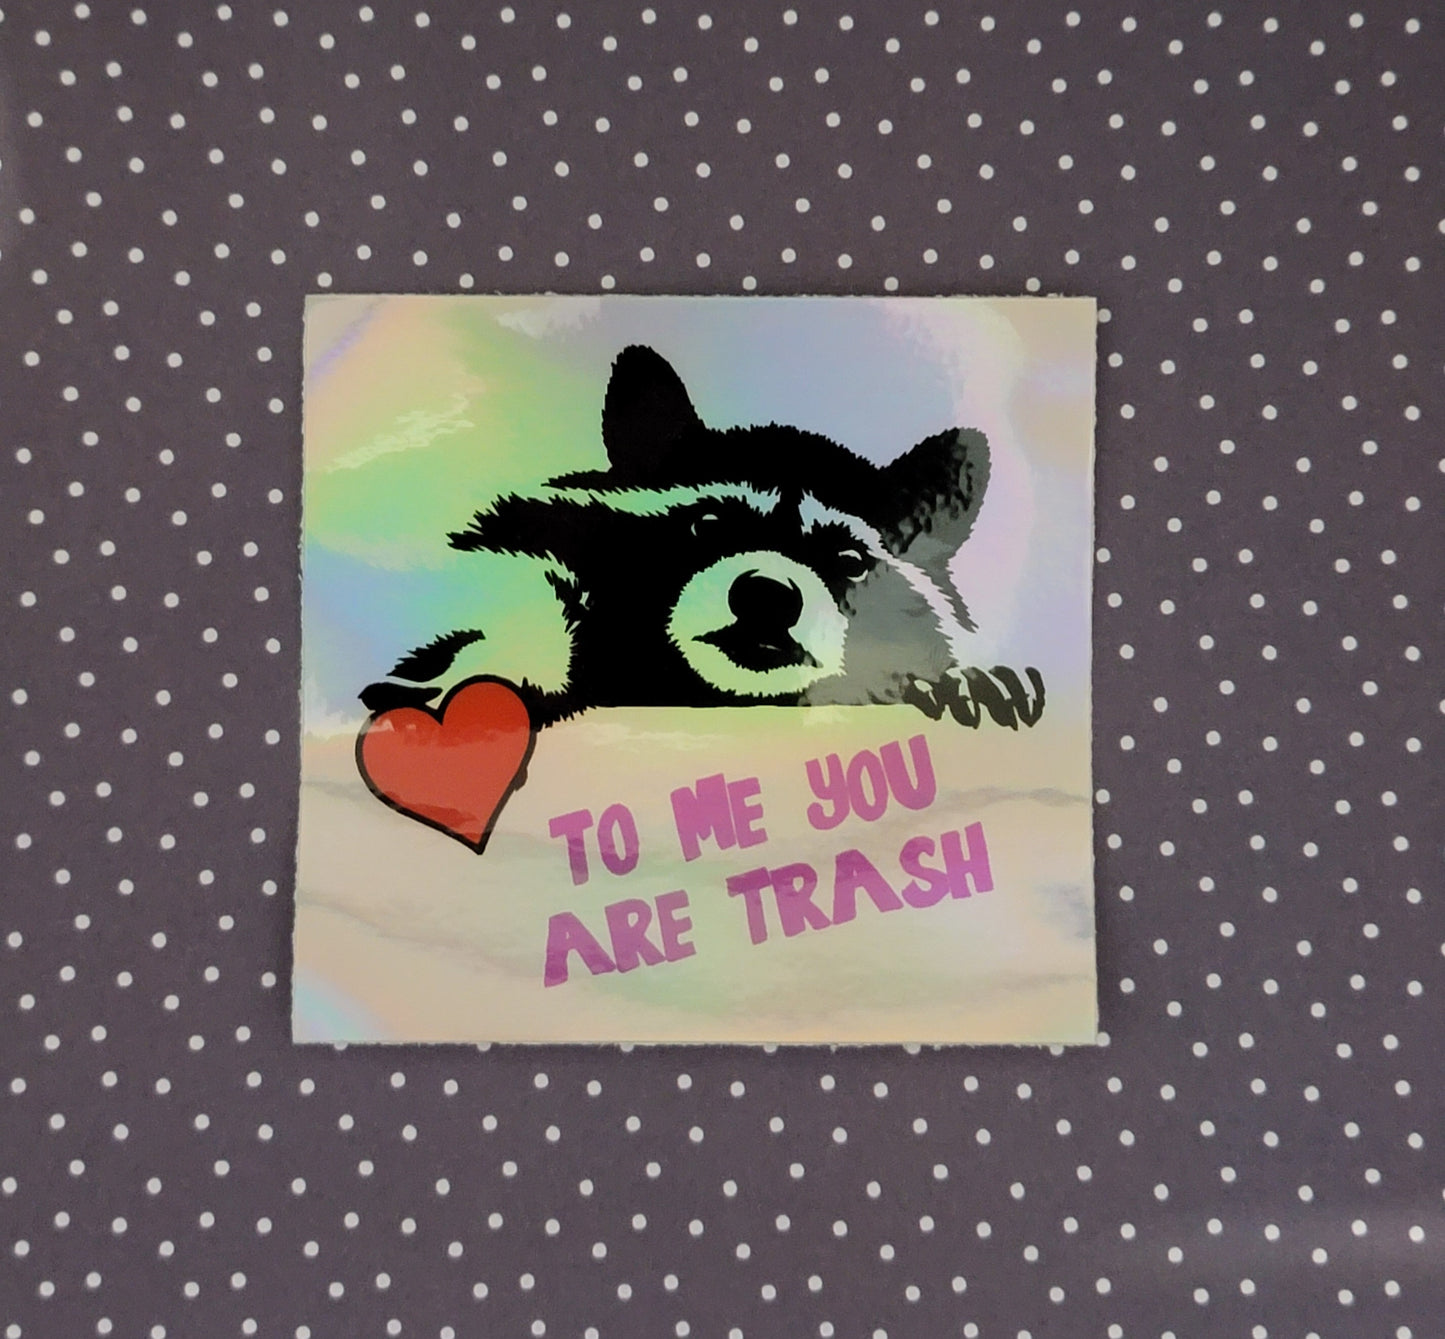 To me you are trash